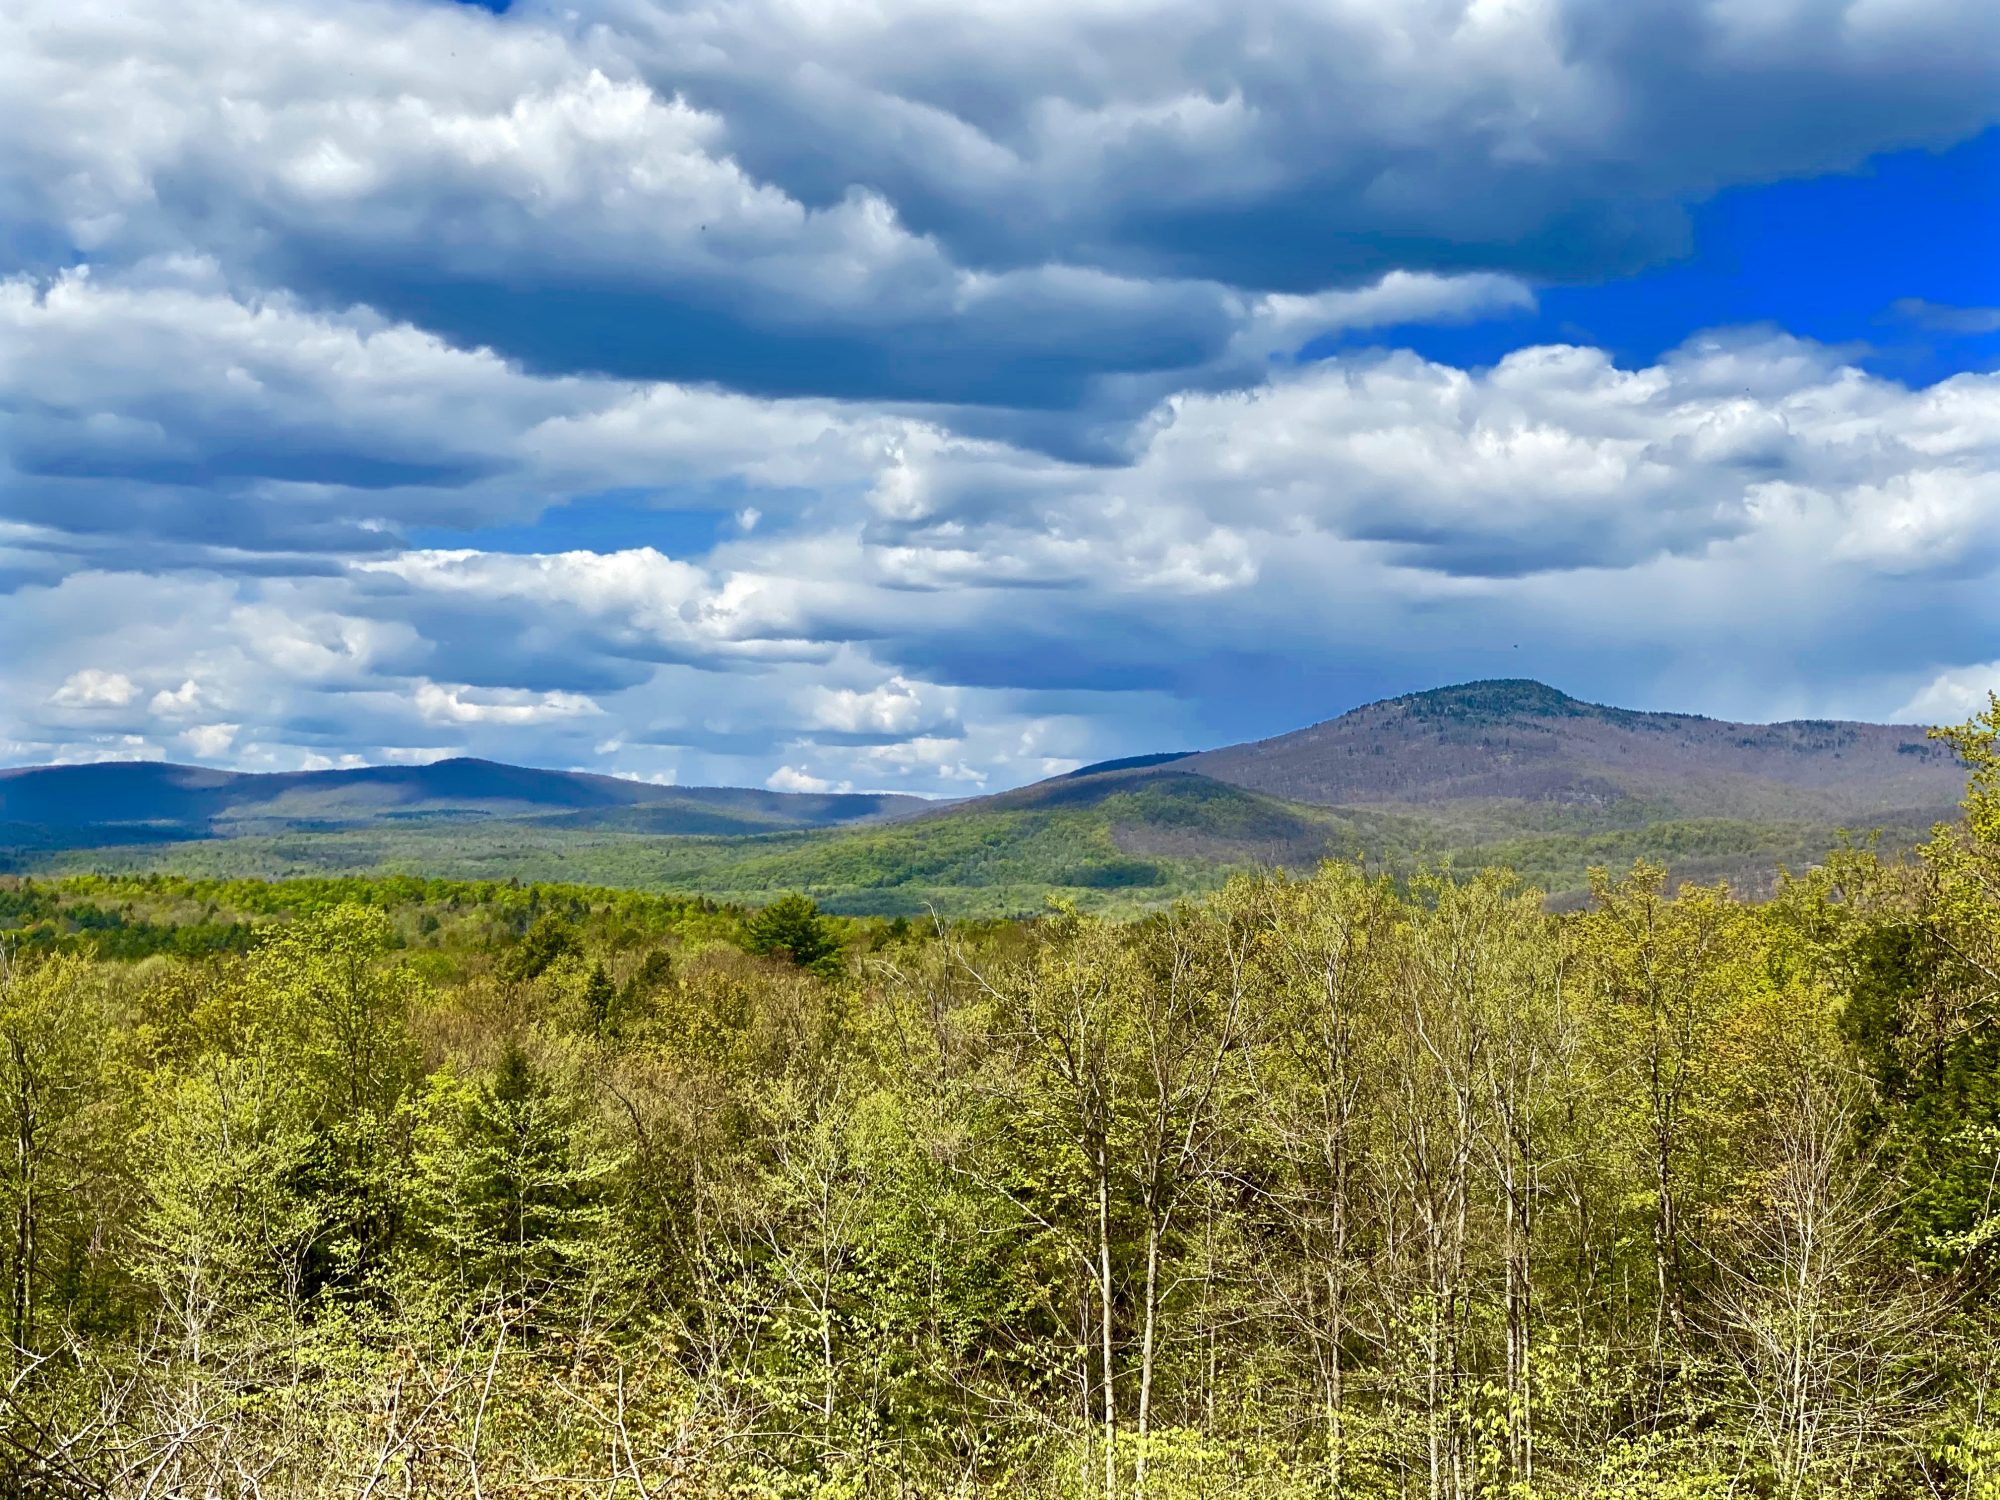 view of adirondack mountains in spring with blue sky and white clouds